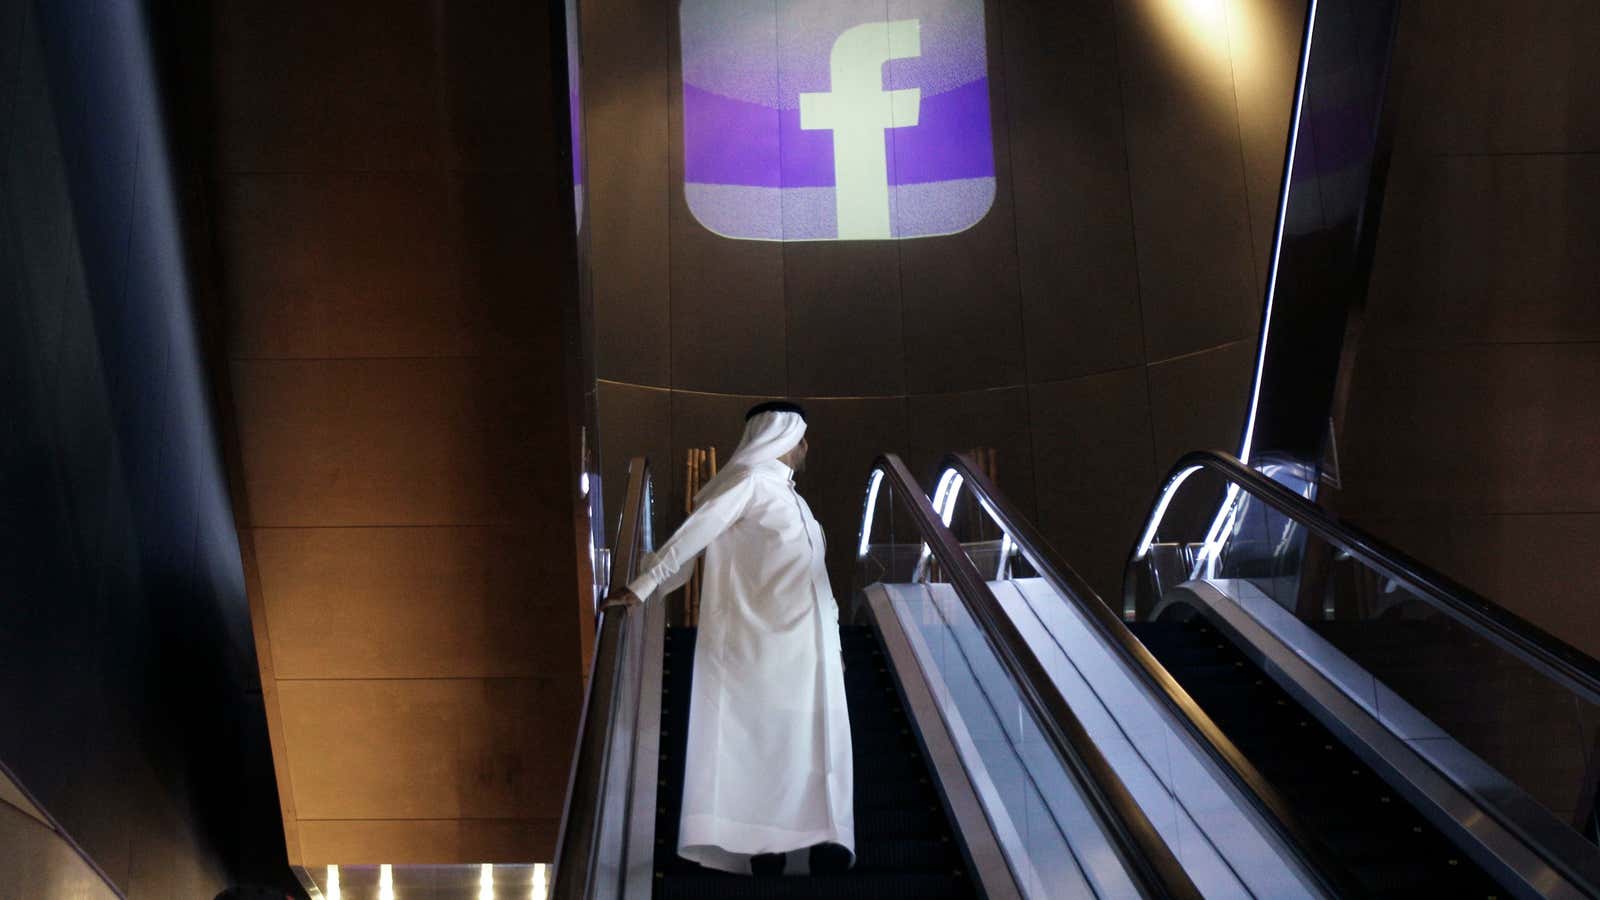 Facebook’s first Middle East and North Africa office was inaugurated in May 2012 at the Armani hotel in Dubai